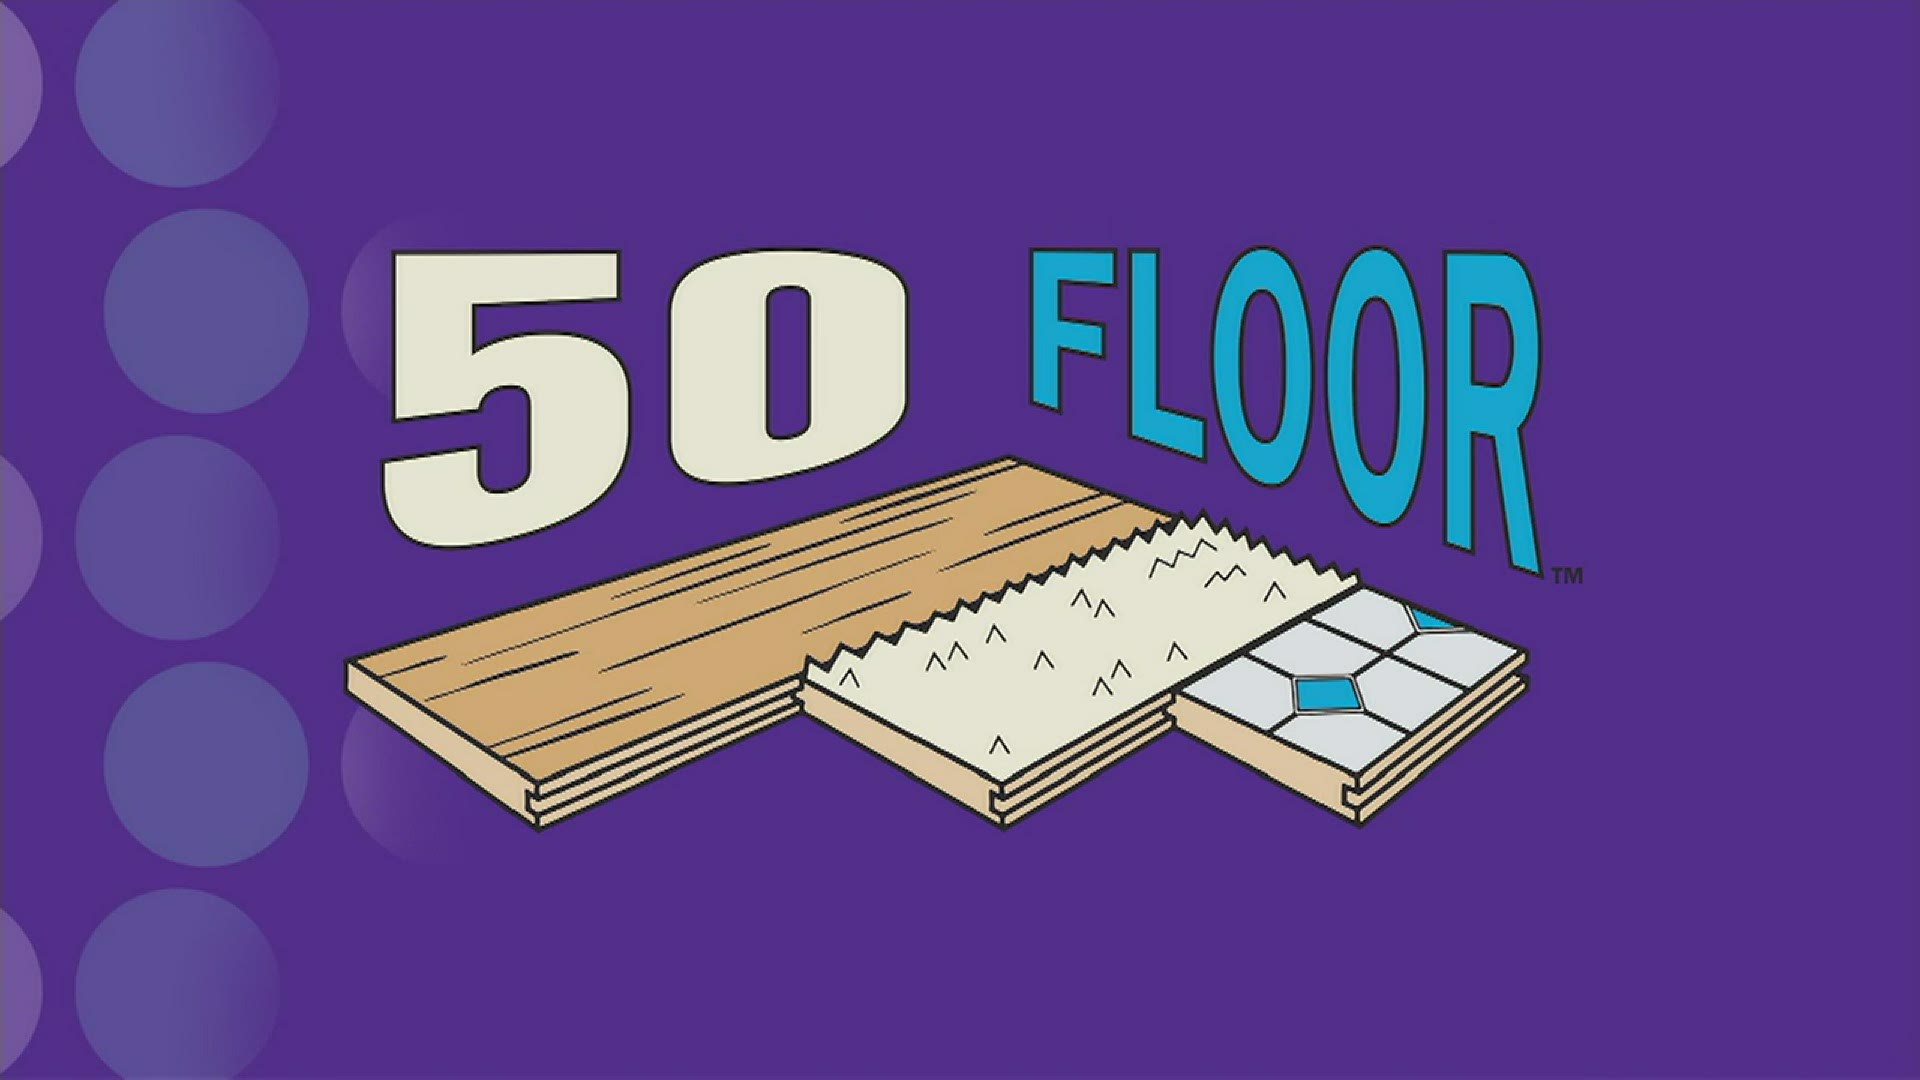 Judy Brown is back to talk with Joe about 50 Floor's amazing special this month and how easy they make the process by coming to you!